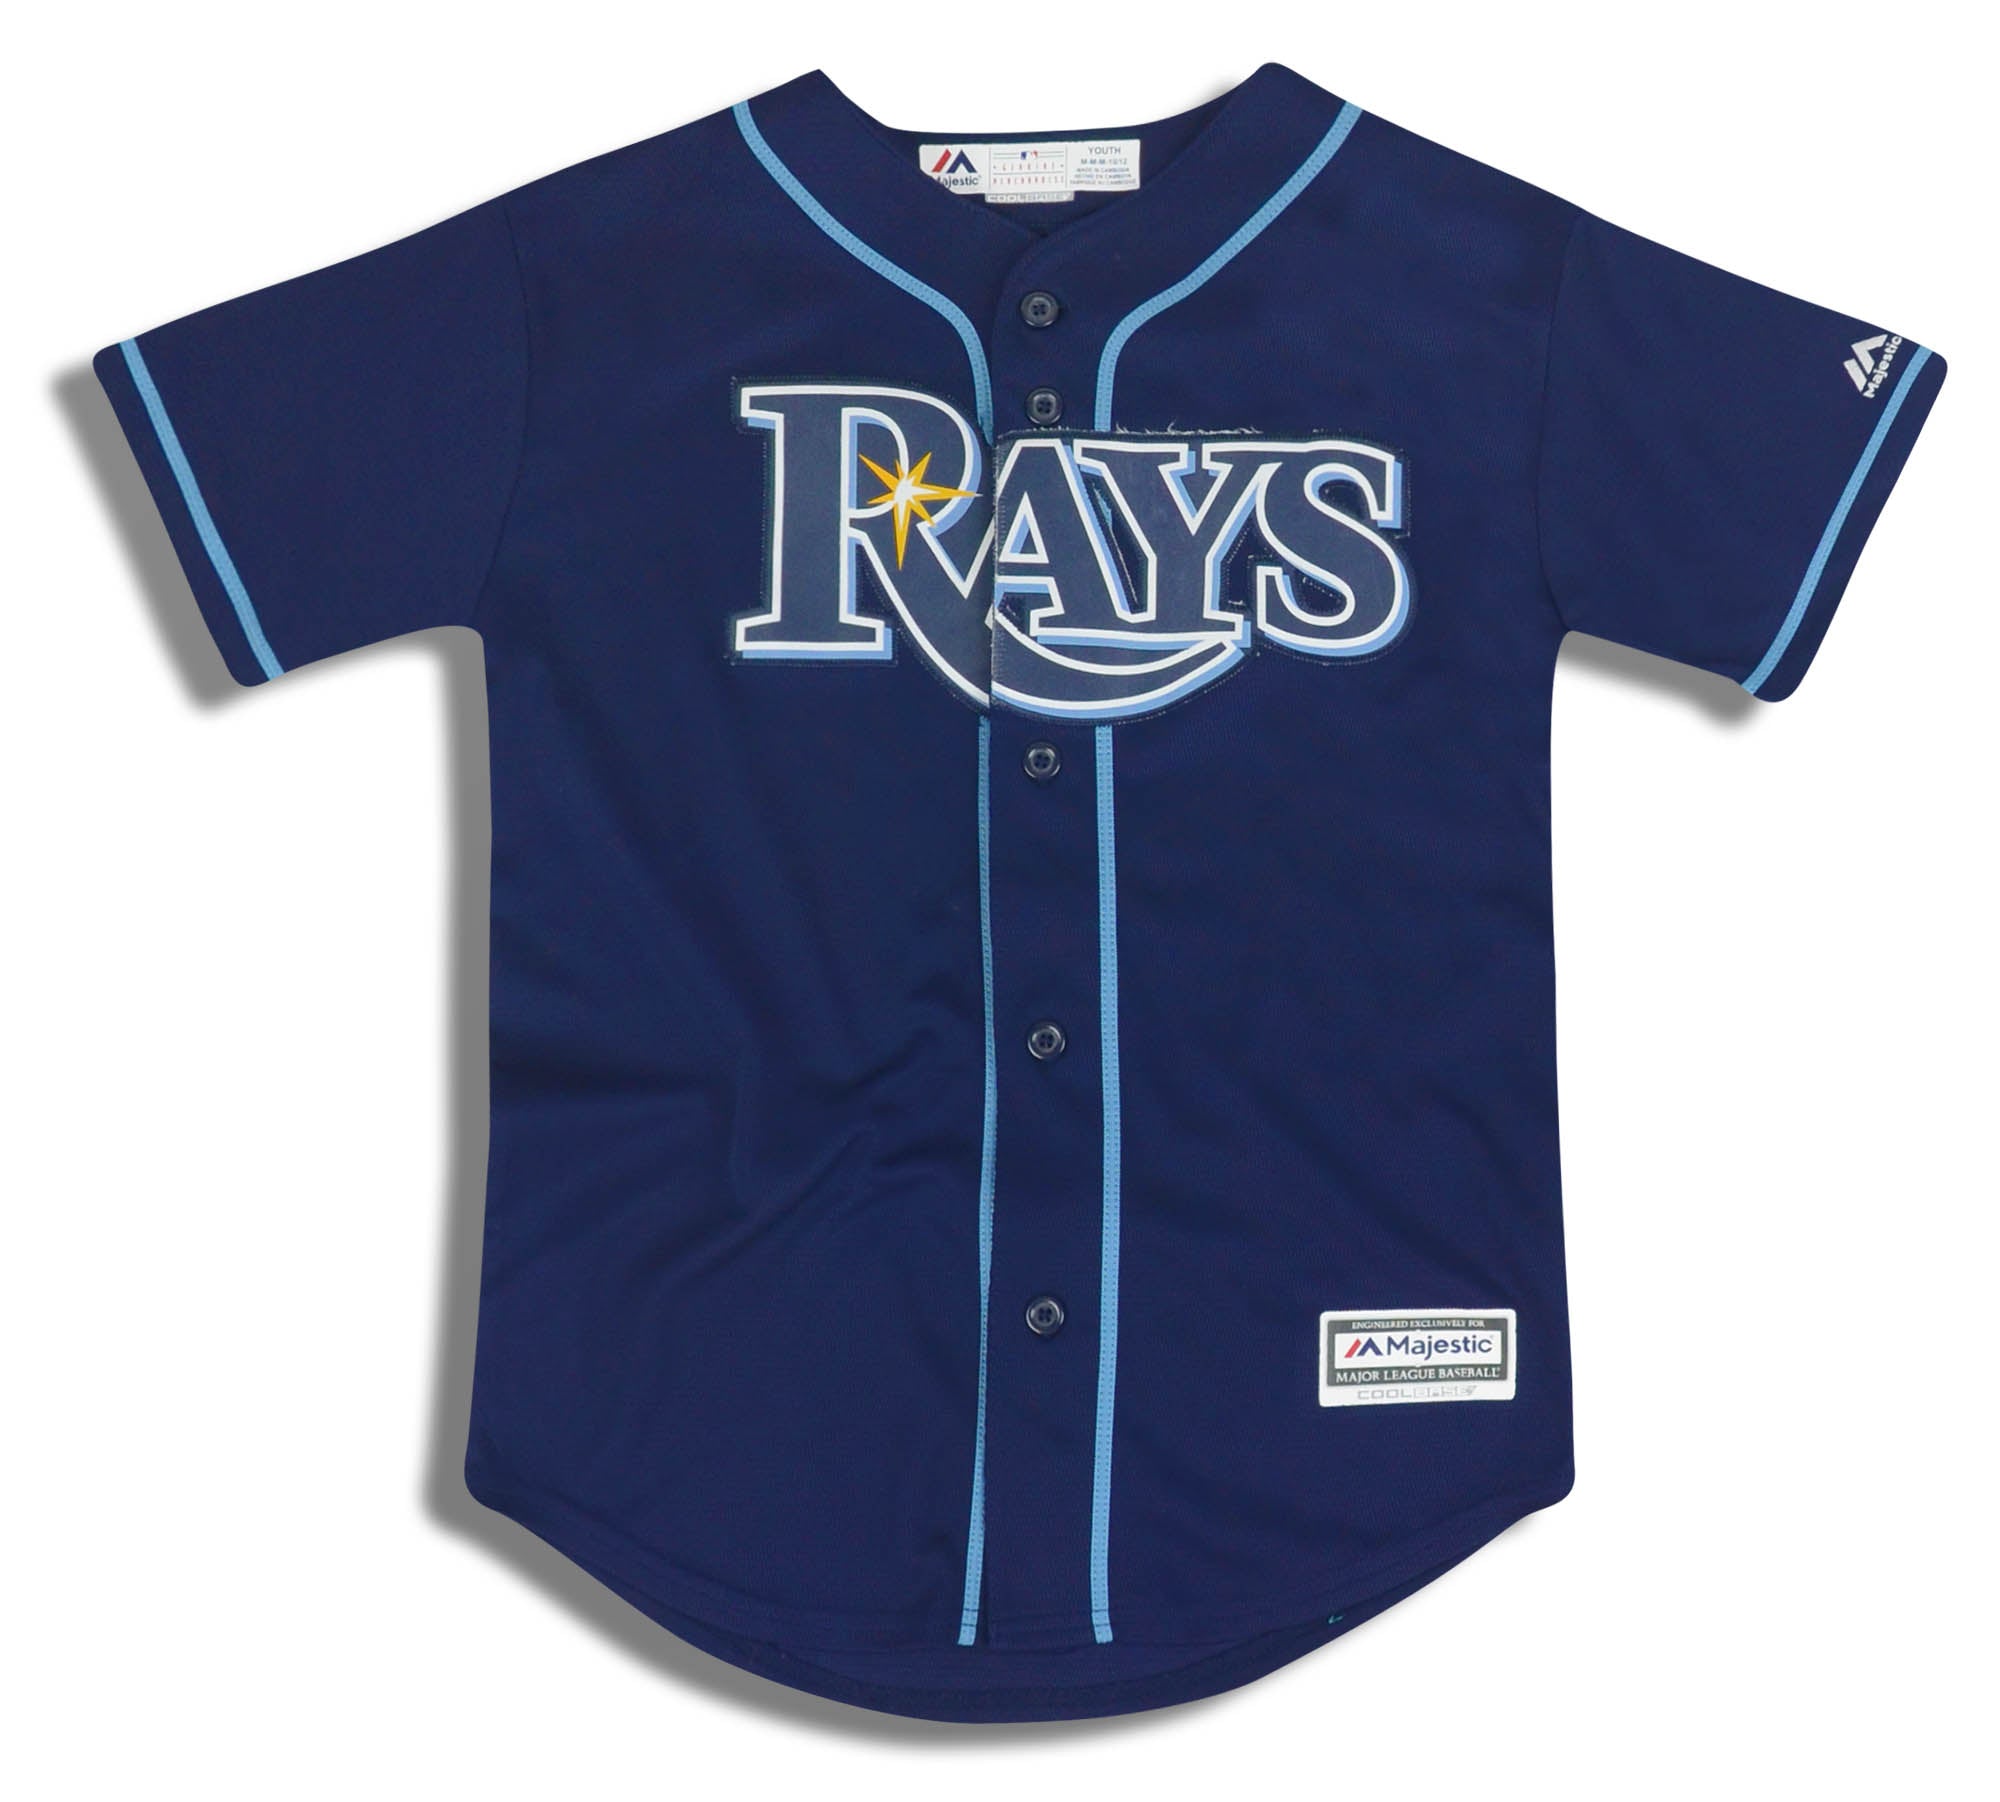 2009-15 TAMPA BAY RAYS MAJESTIC COOL BASE JERSEY (ALTERNATE) Y